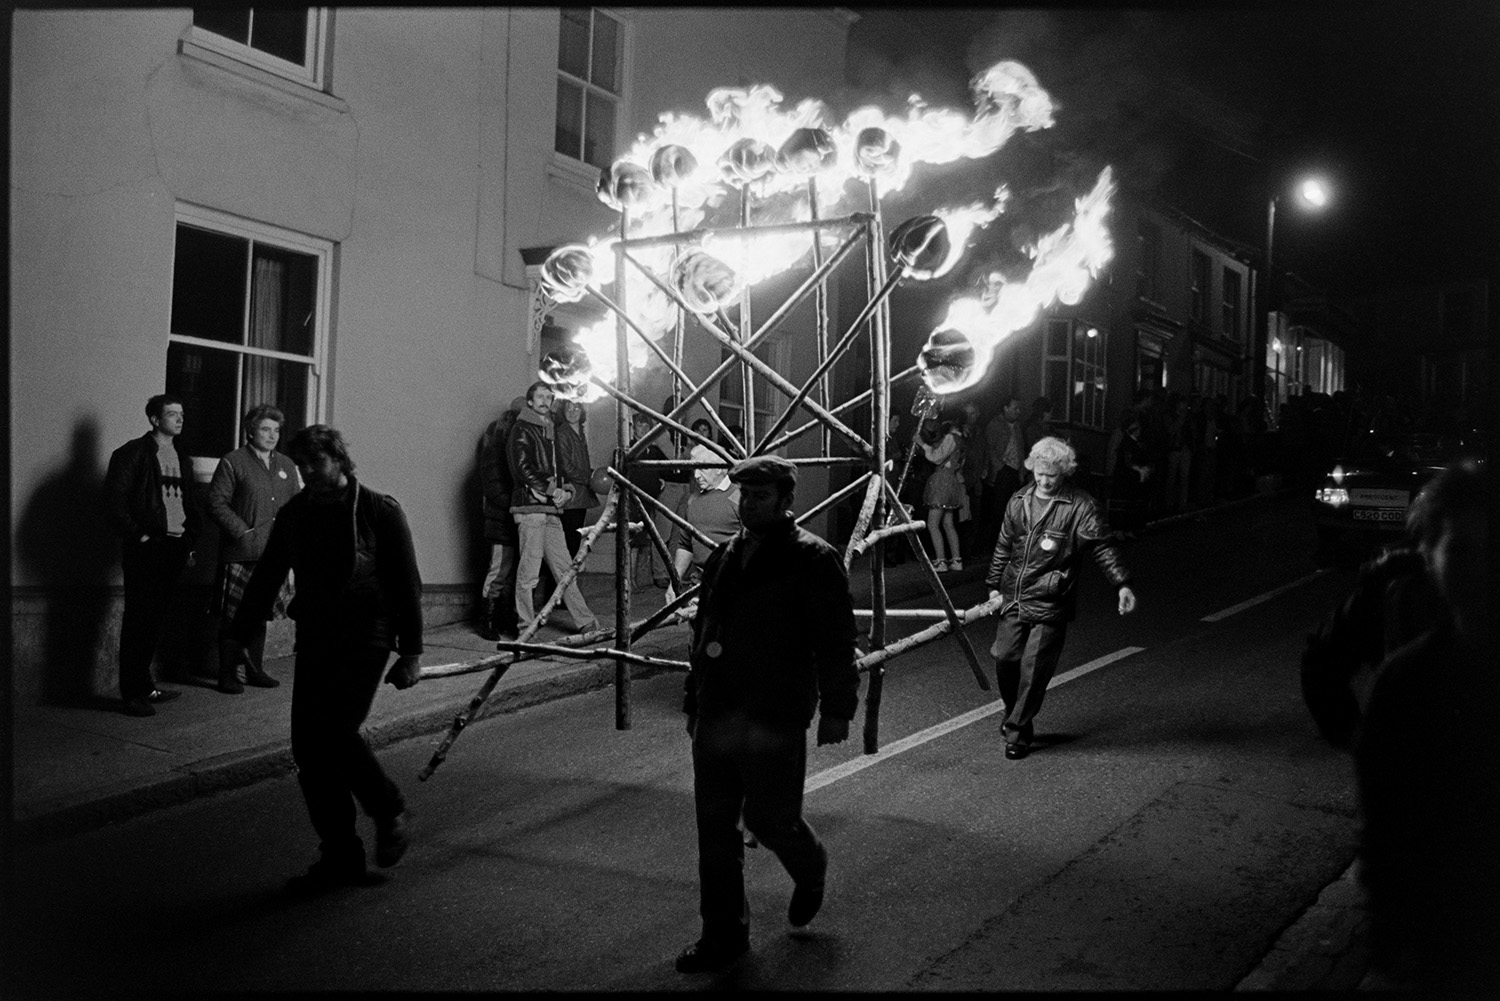 Carnival procession at night, with burning torches and blazing tar barrels, floats.
[Four men walking down a street carrying a timber frame of burning torches at Hatherleigh Carnival. Spectators are lining the street watching.]